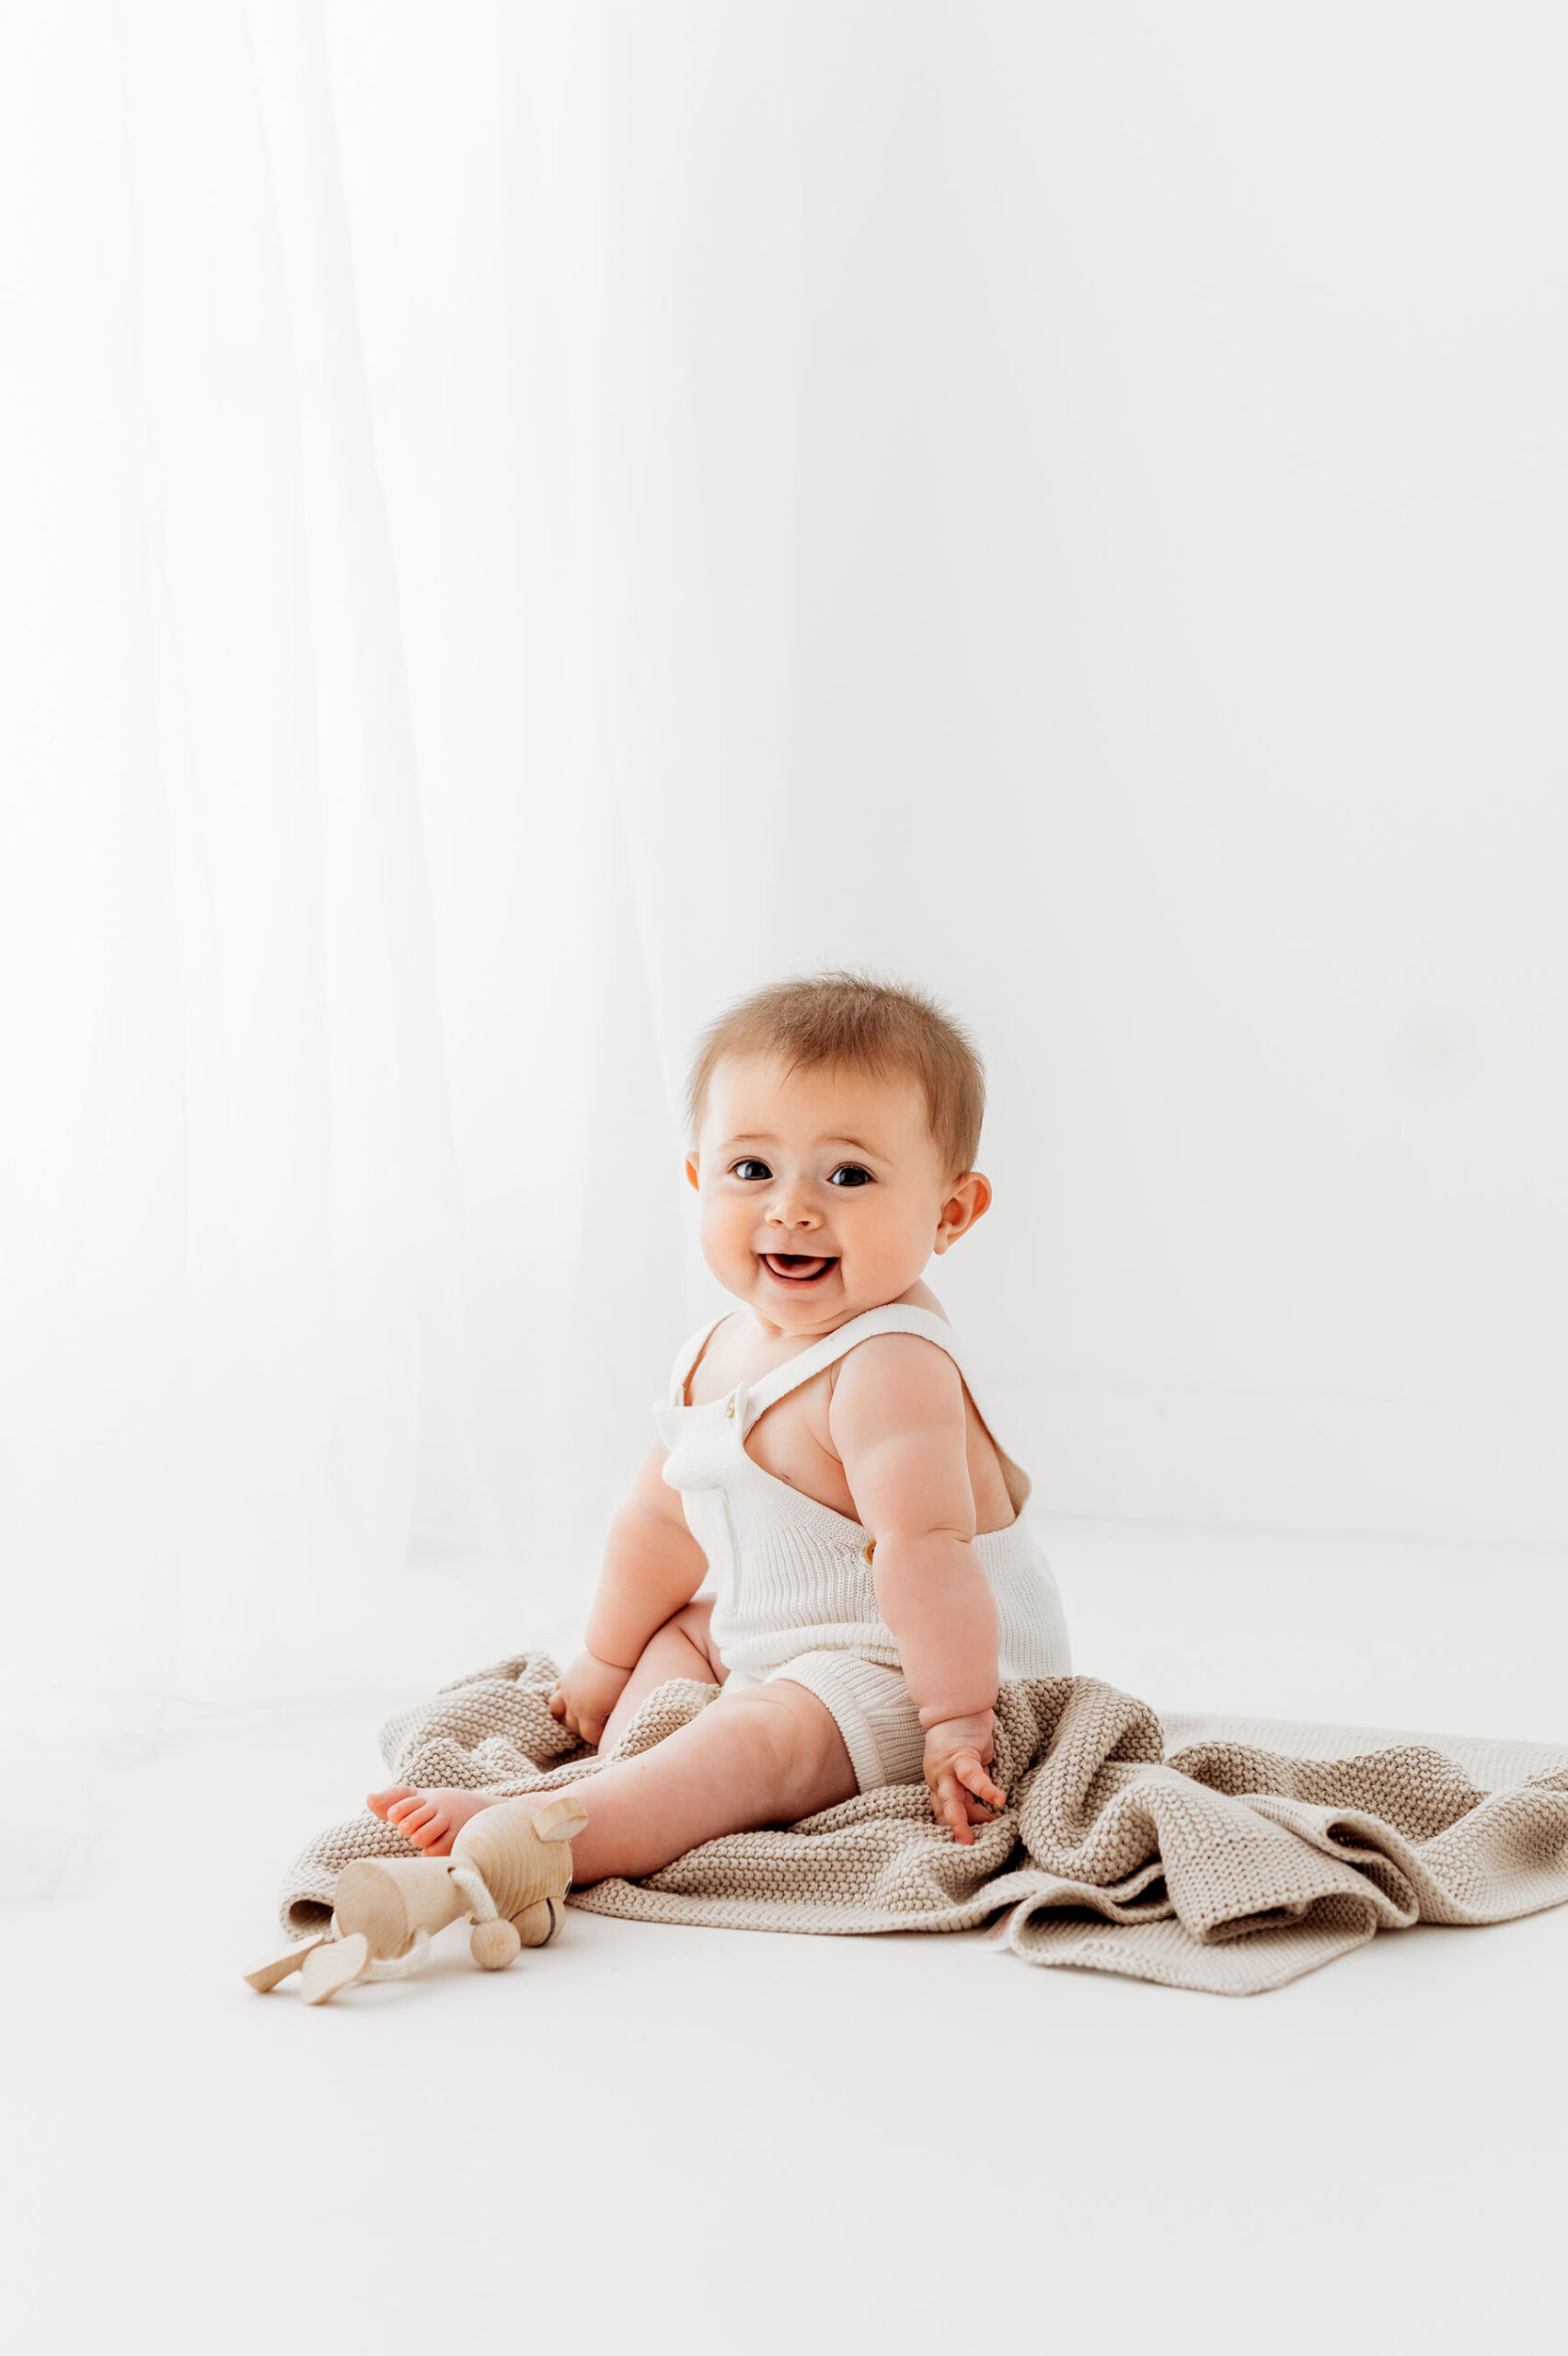 Baby photoshoot- baby girl sitting on beige blanket in a white romper